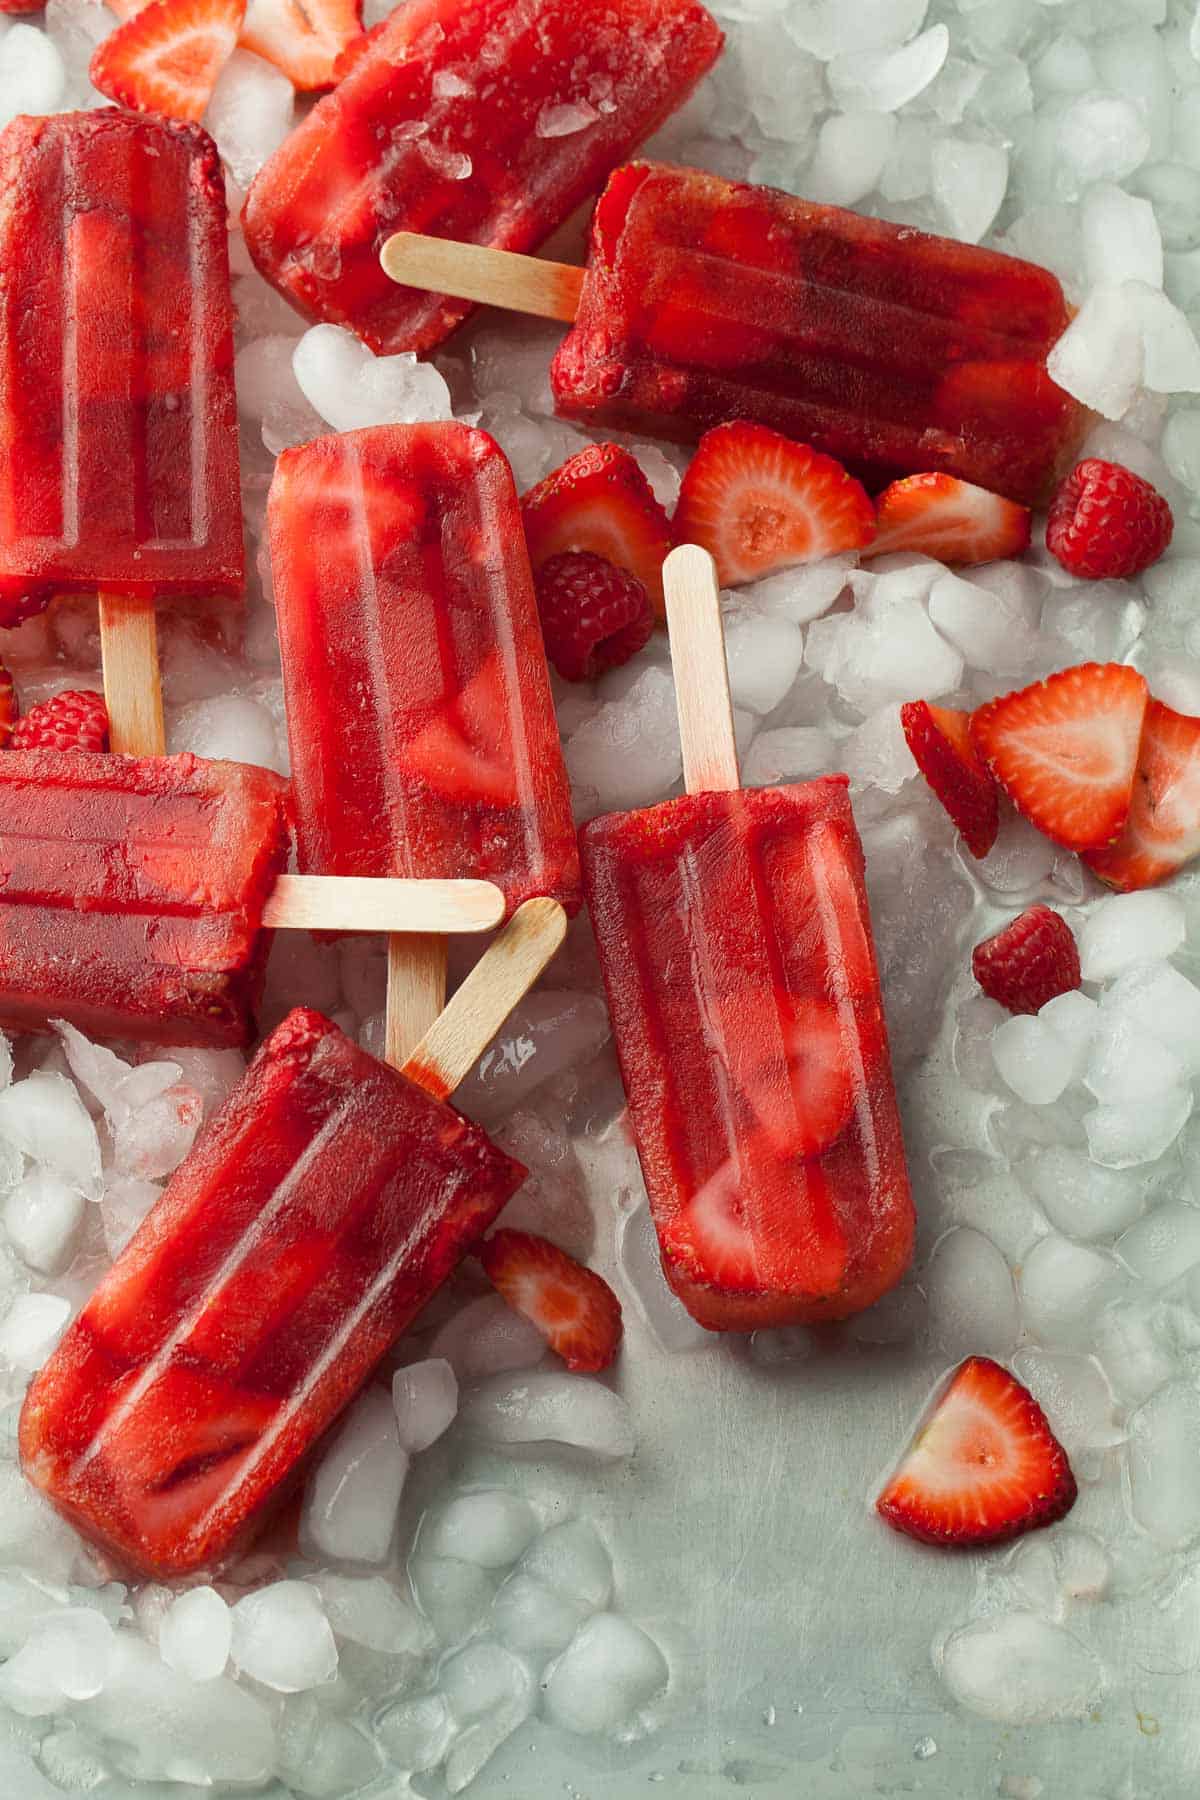 Red Berry Rose Hip Iced Tea Popsicles on Ice